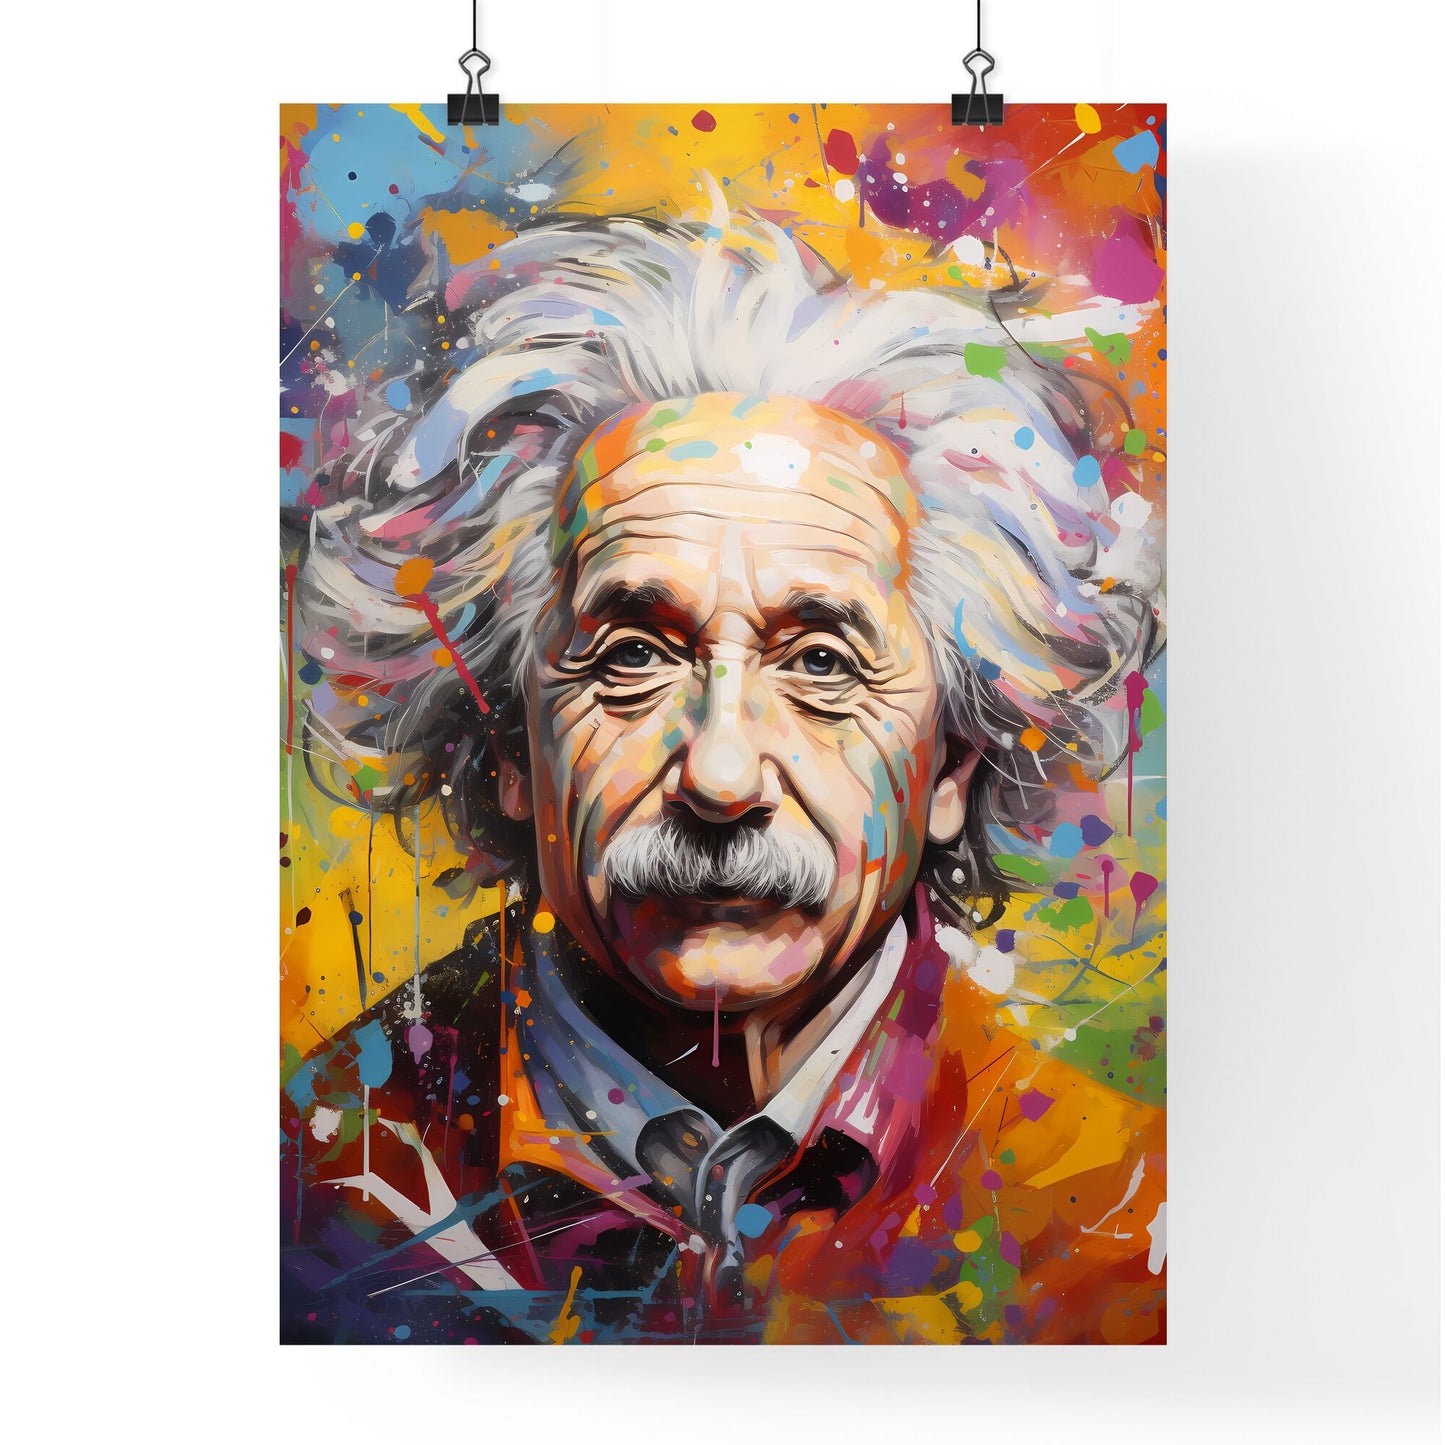 Albert Einstein - A Painting Of A Man With White Hair Default Title